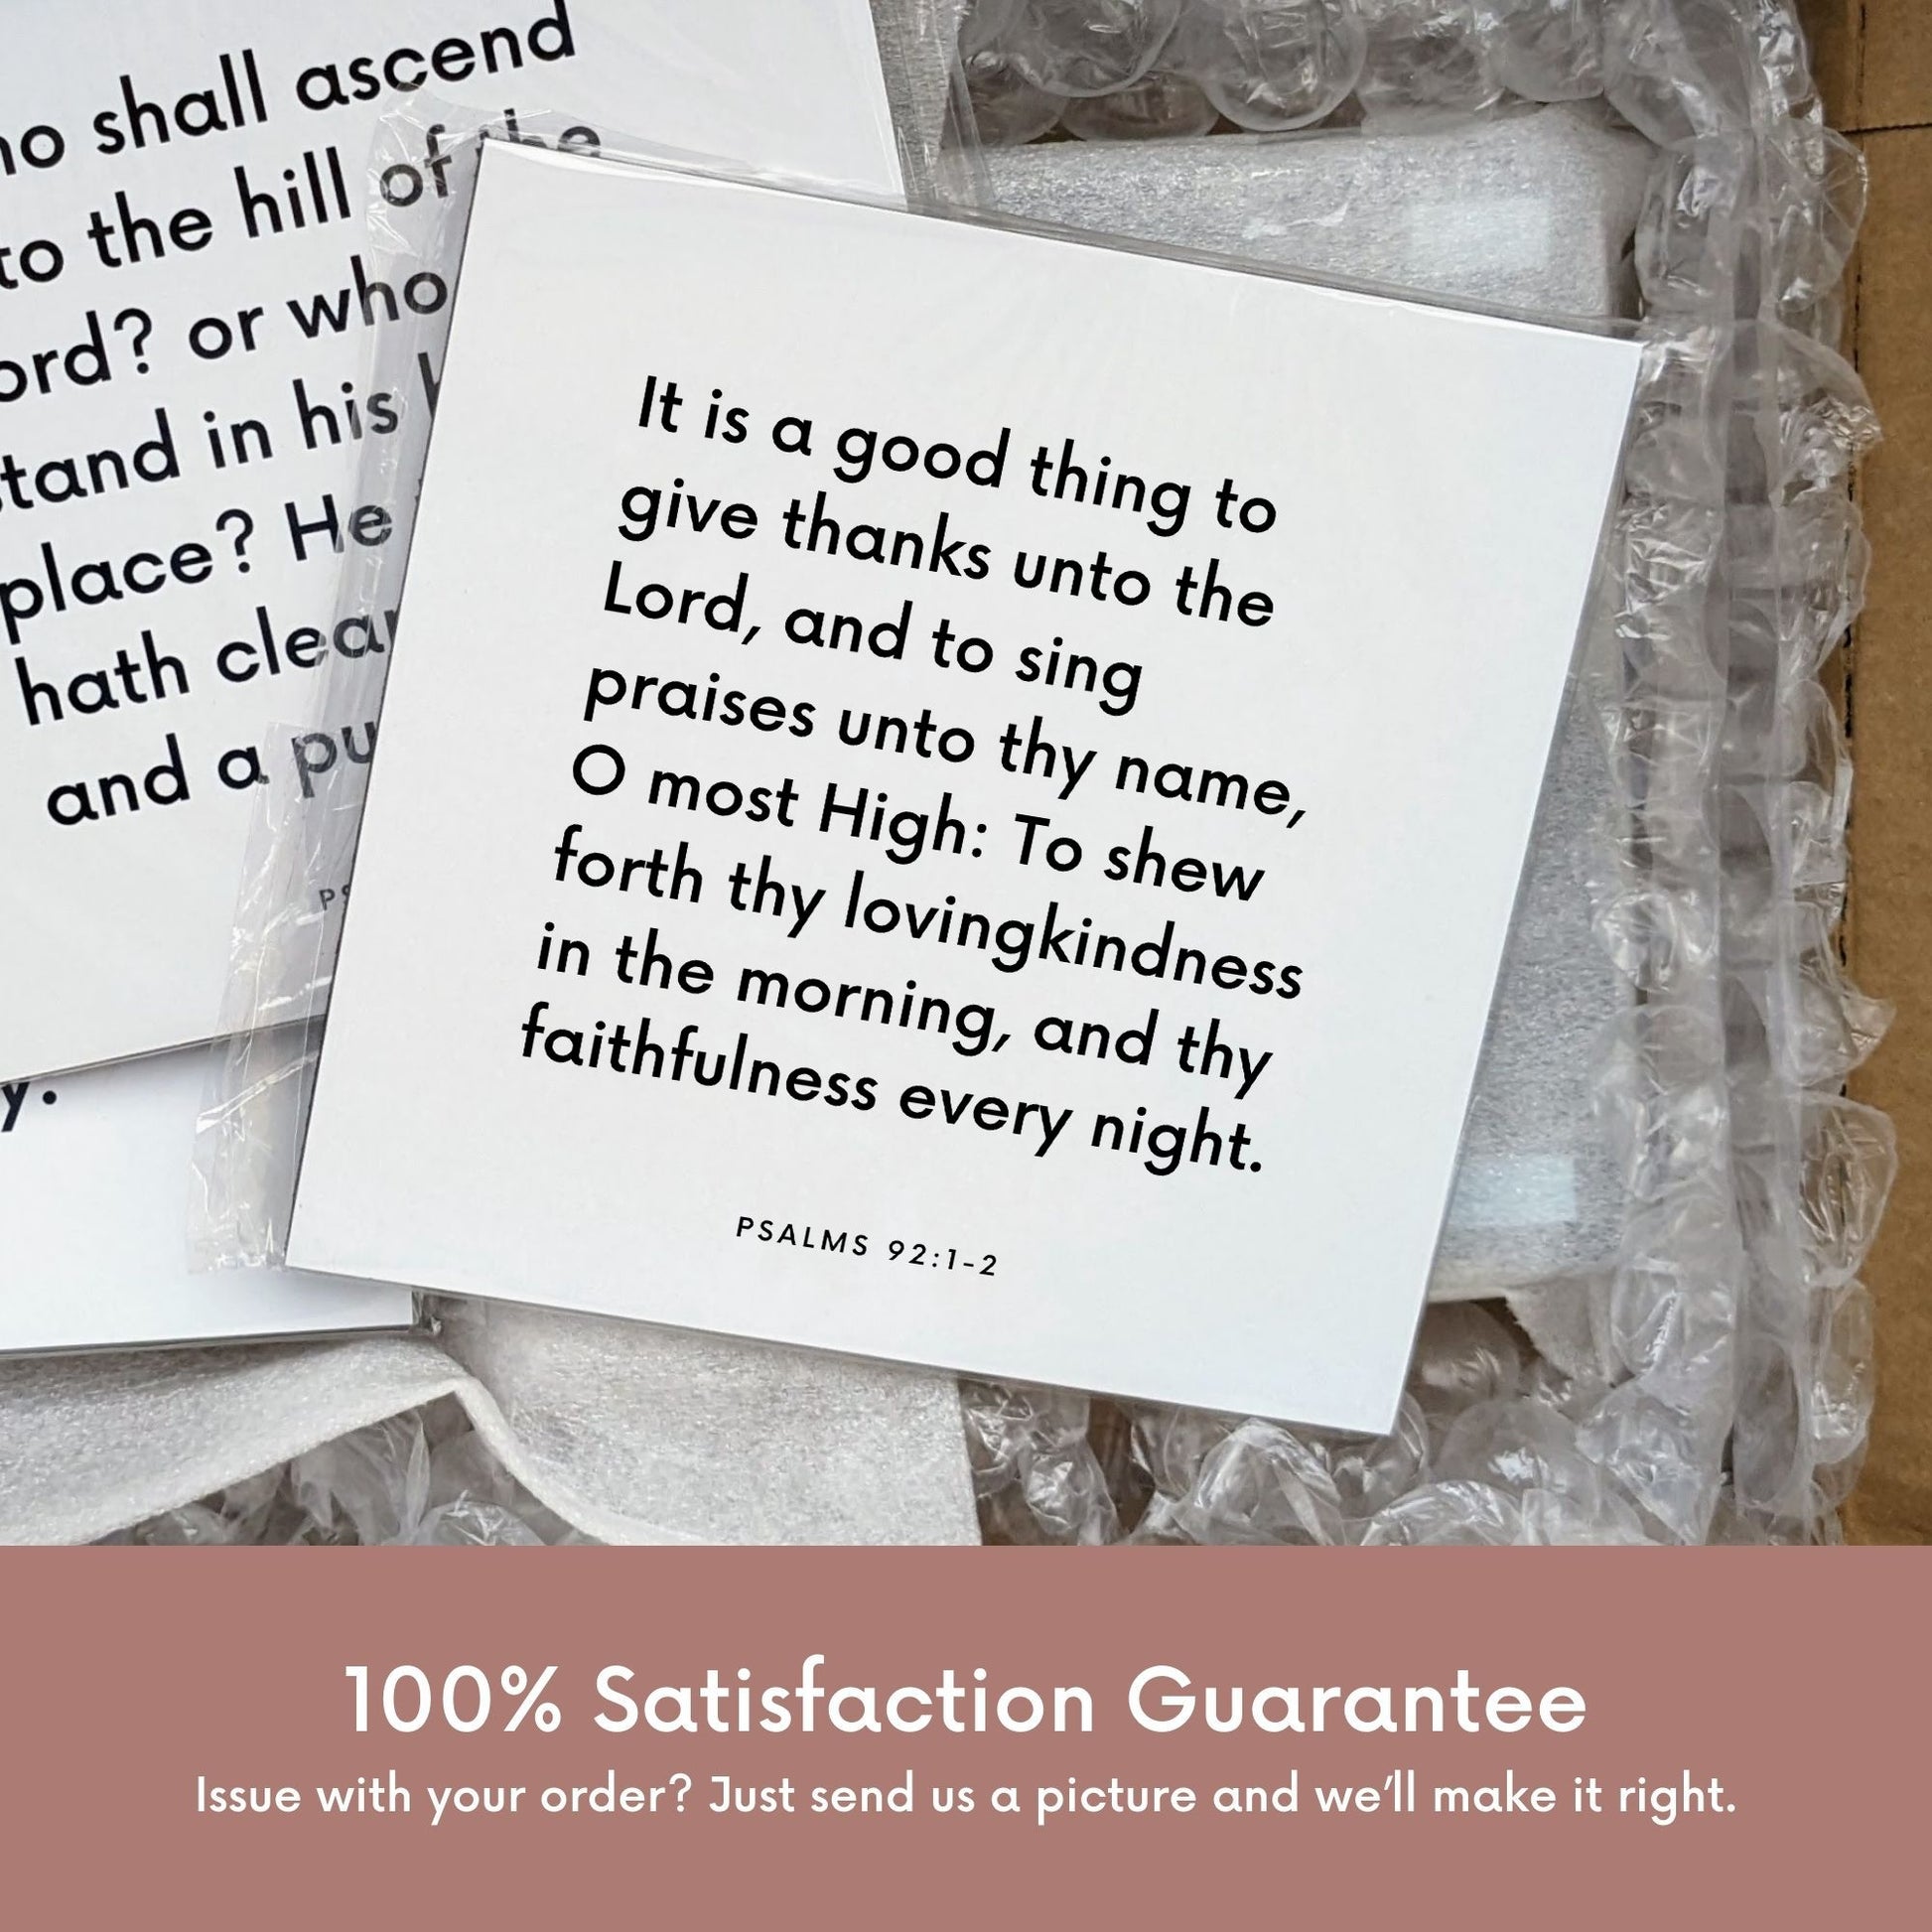 Shipping materials for scripture tile of Psalms 92:1-2 - "It is a good thing to give thanks unto the Lord"